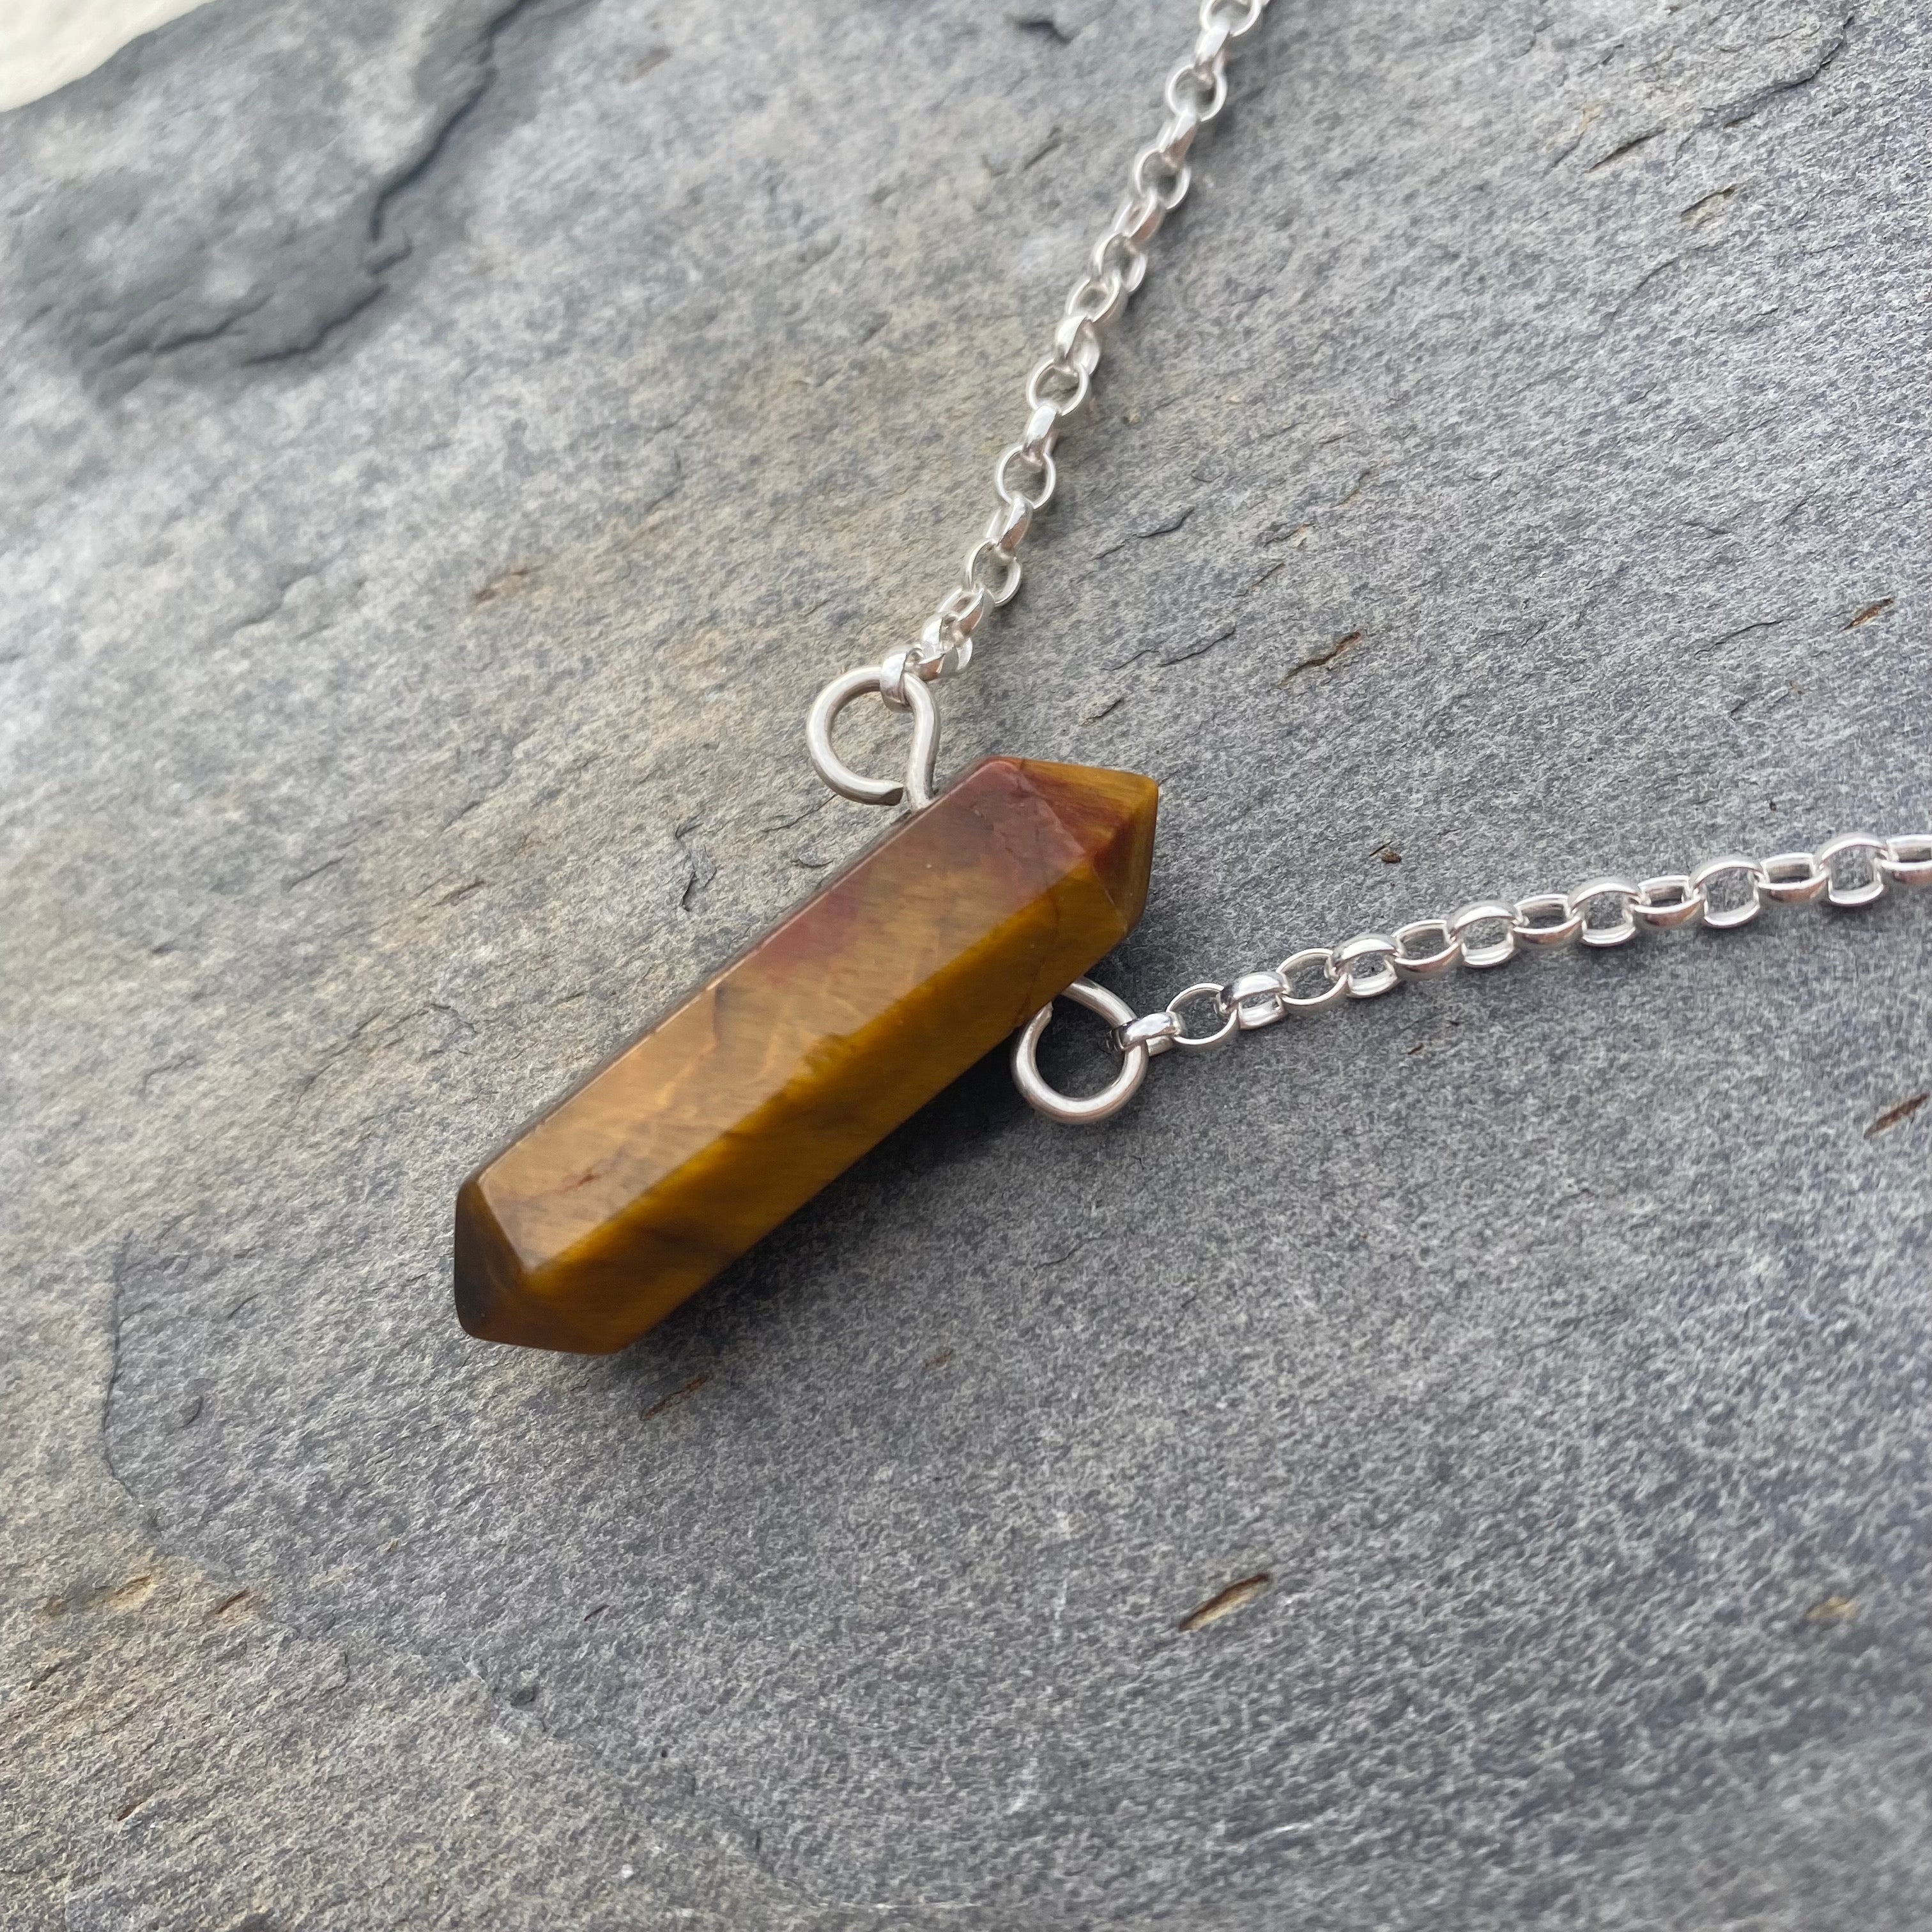 Tigers Eye Necklace - Sterling Silver Belcher Chain - Natural Crystal Jewellery